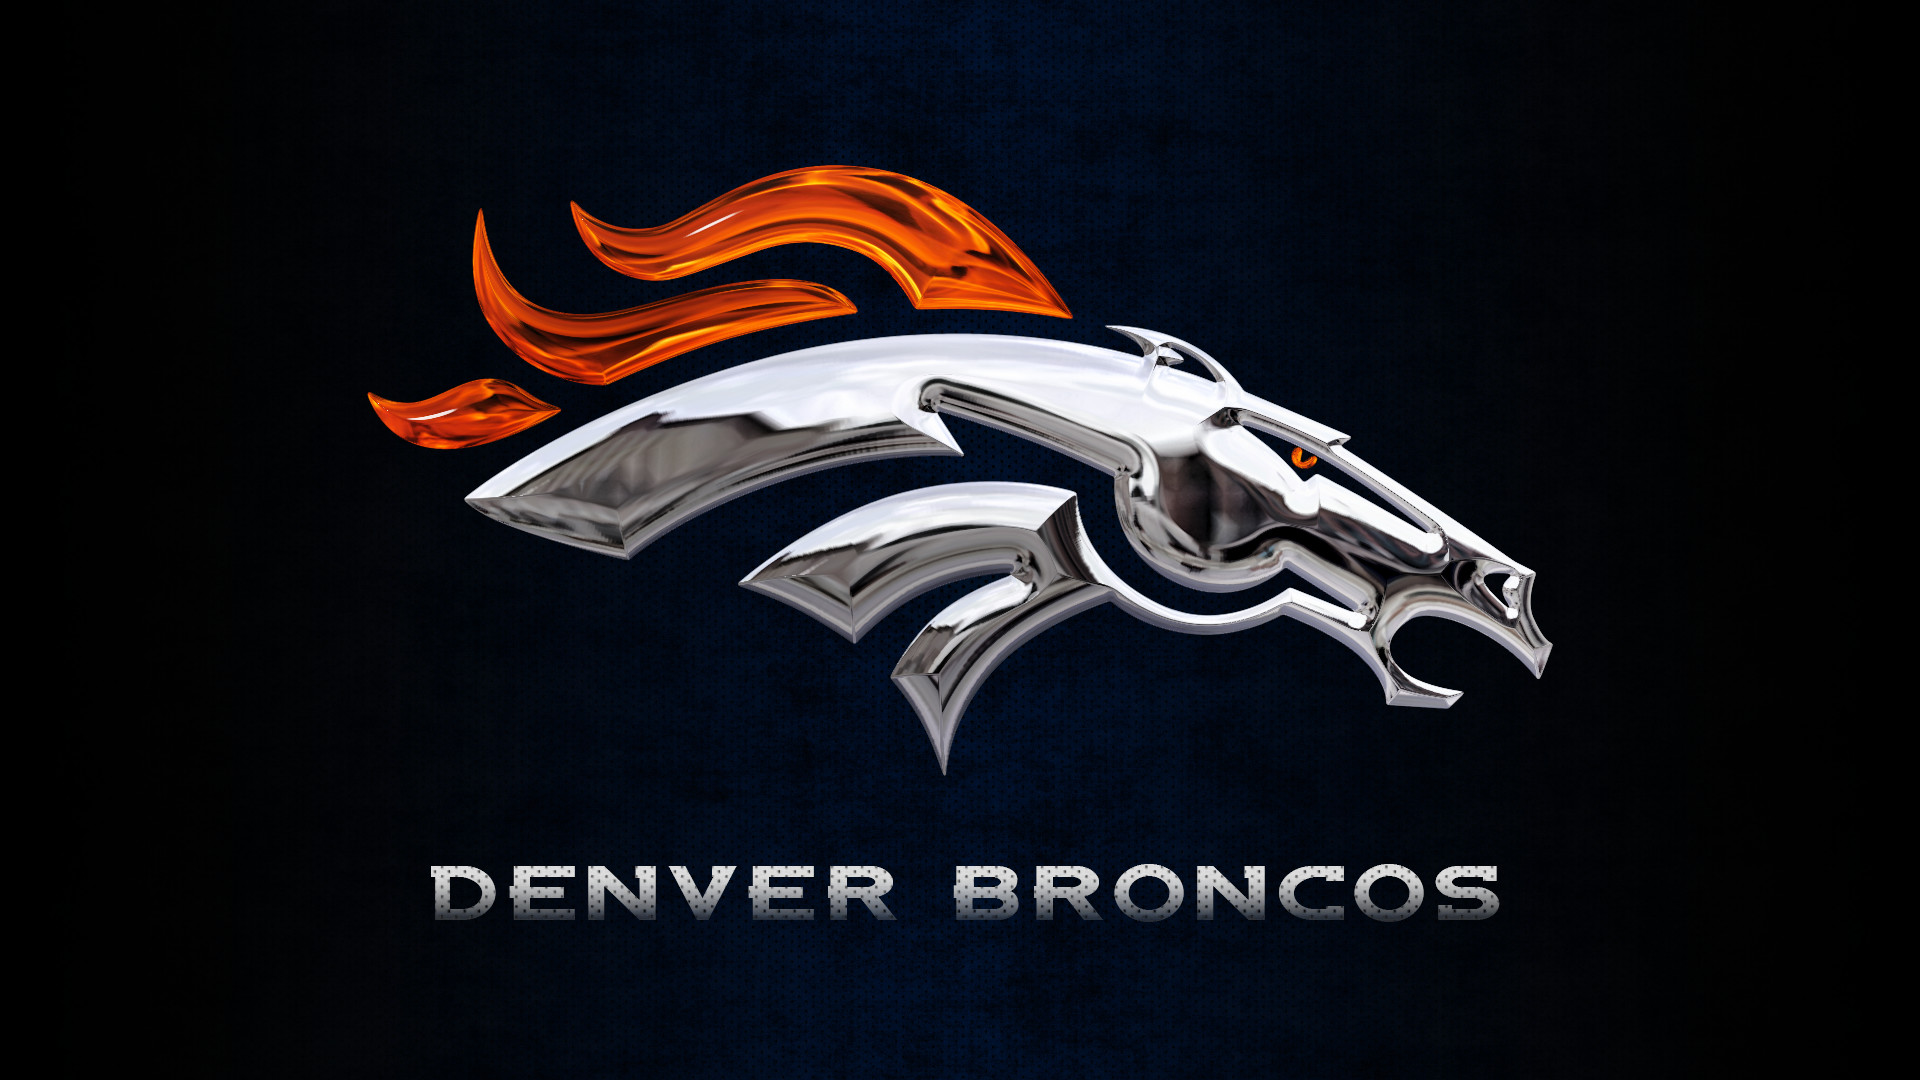 1920x1080 Denver Broncos HD Wallpaper | Background Image |  | ID:982029 -  Wallpaper Abyss